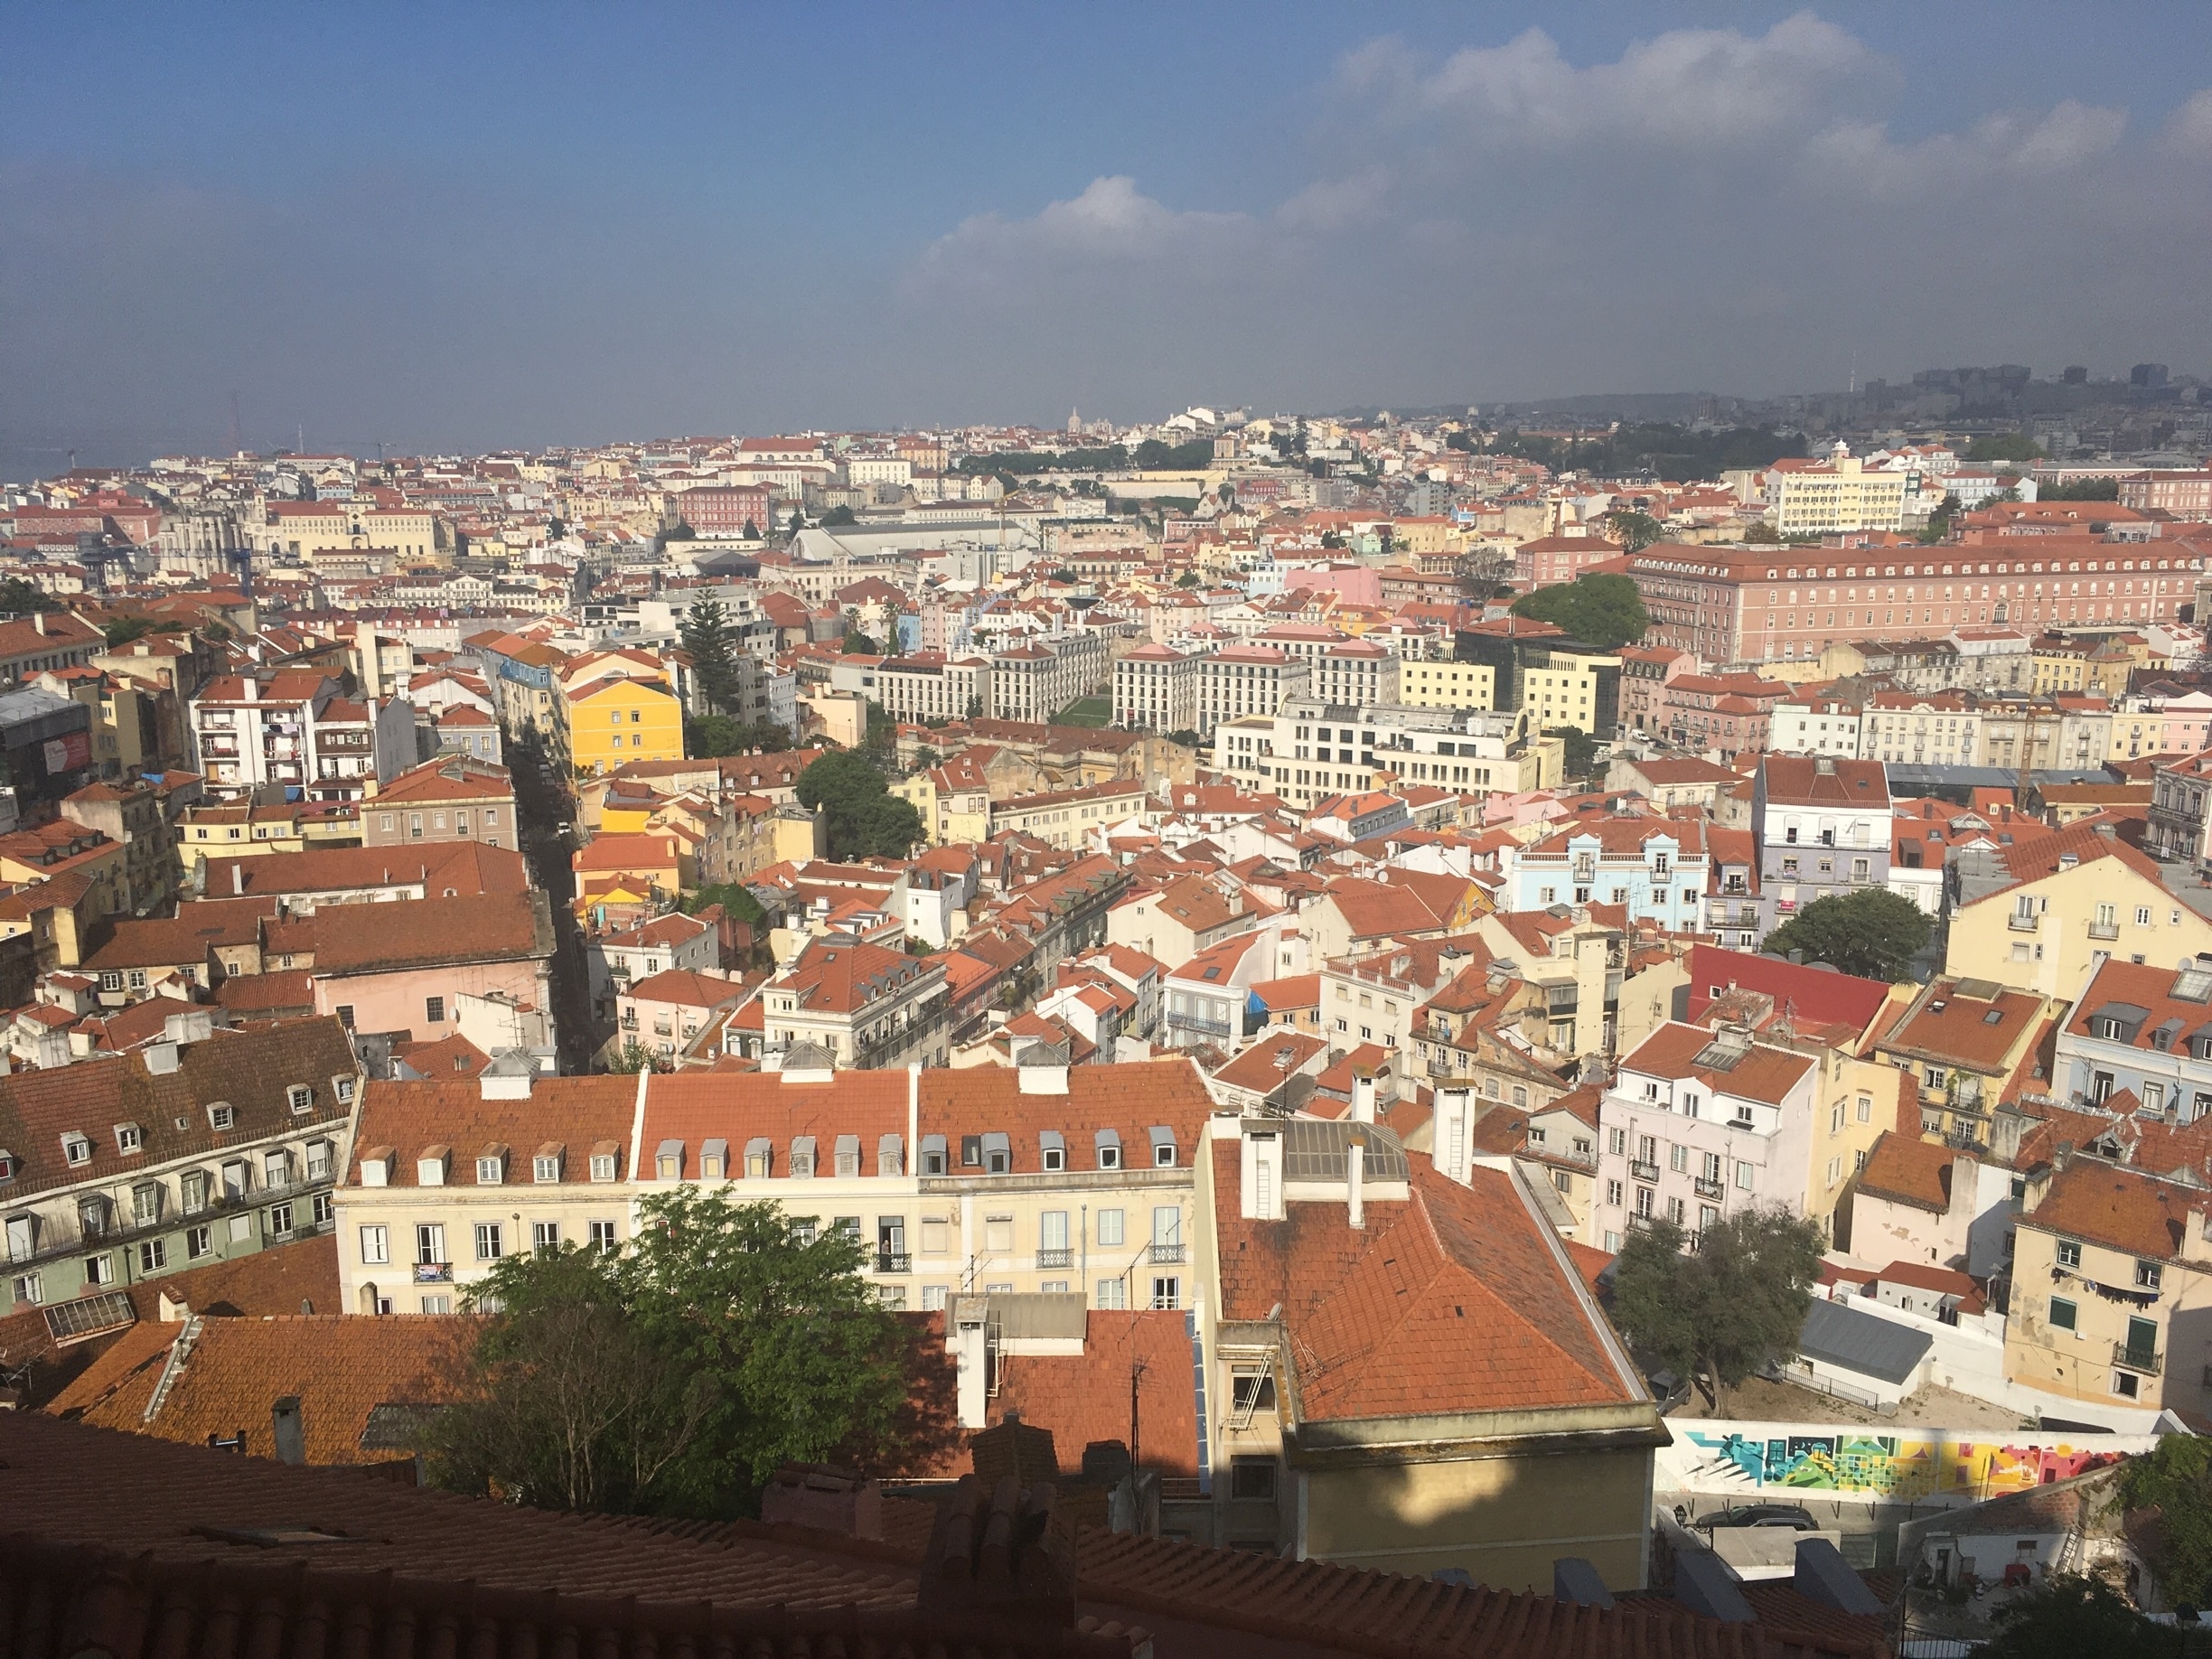 The city wakes up from the Friday night parties. From Miradouro da Graça, right next to the beautiful church, we can see the rooftops of the city waiting to be discovered. #Lisbon #Portugal 